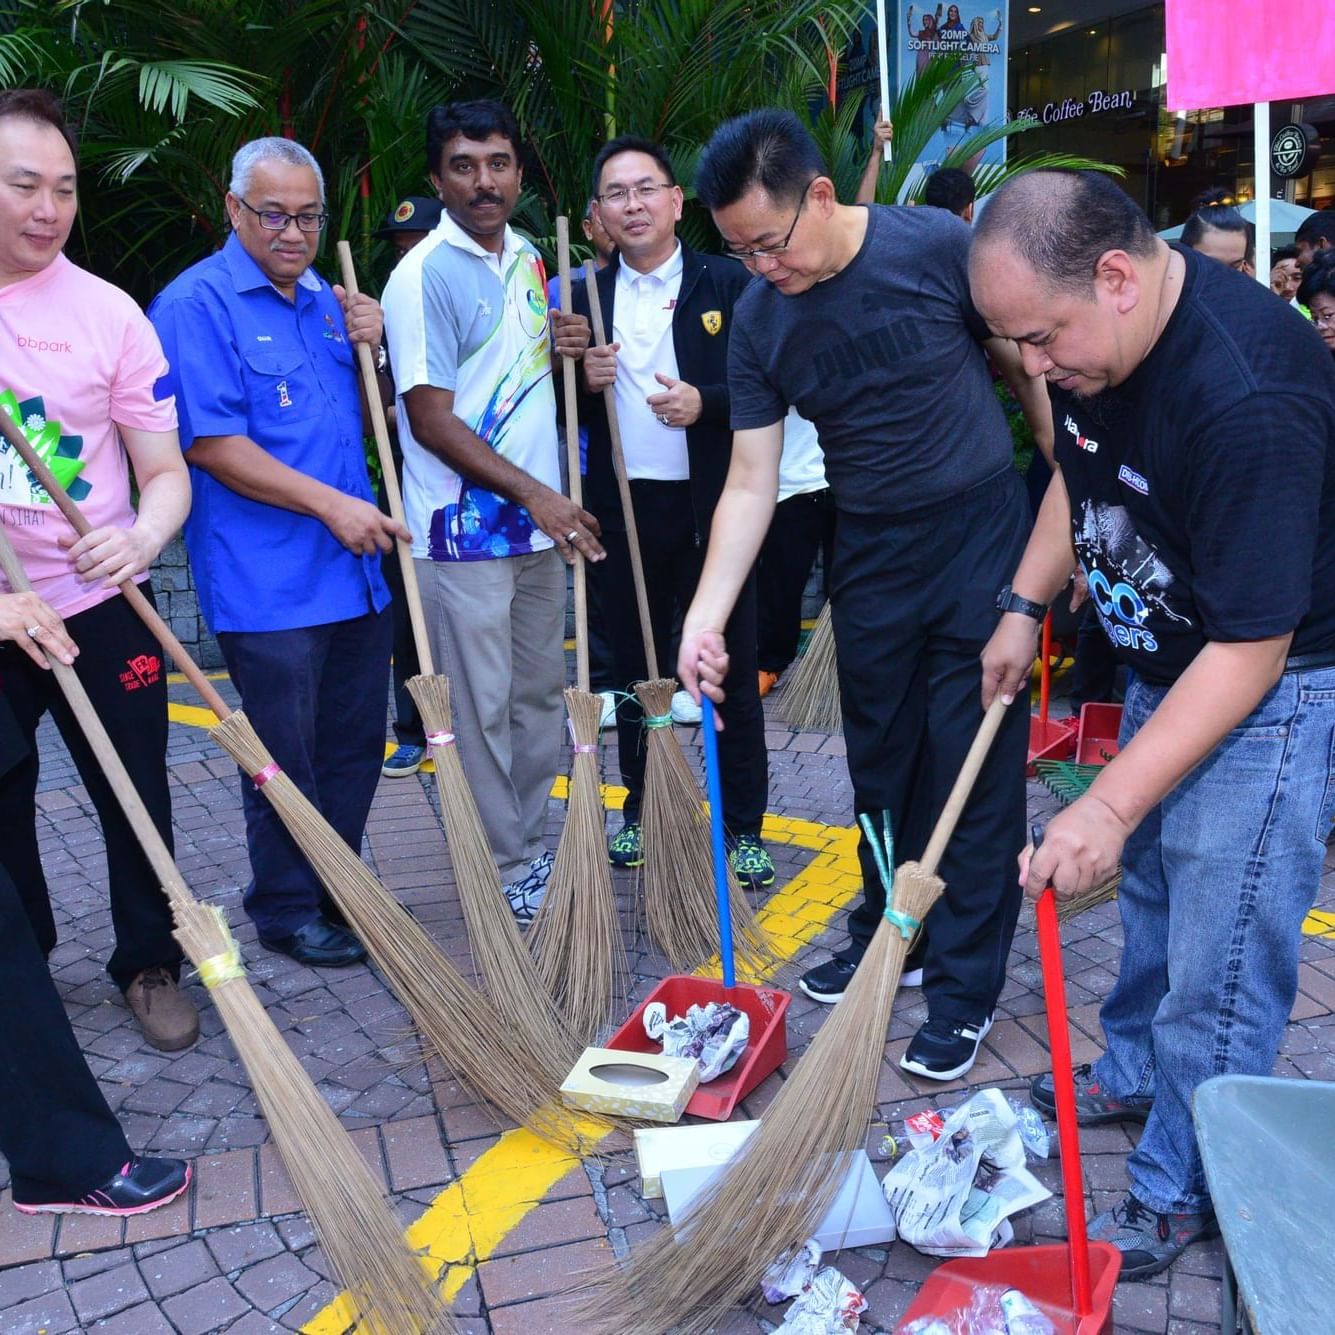 Cleaning campaign near The Federal Kuala Lumpur